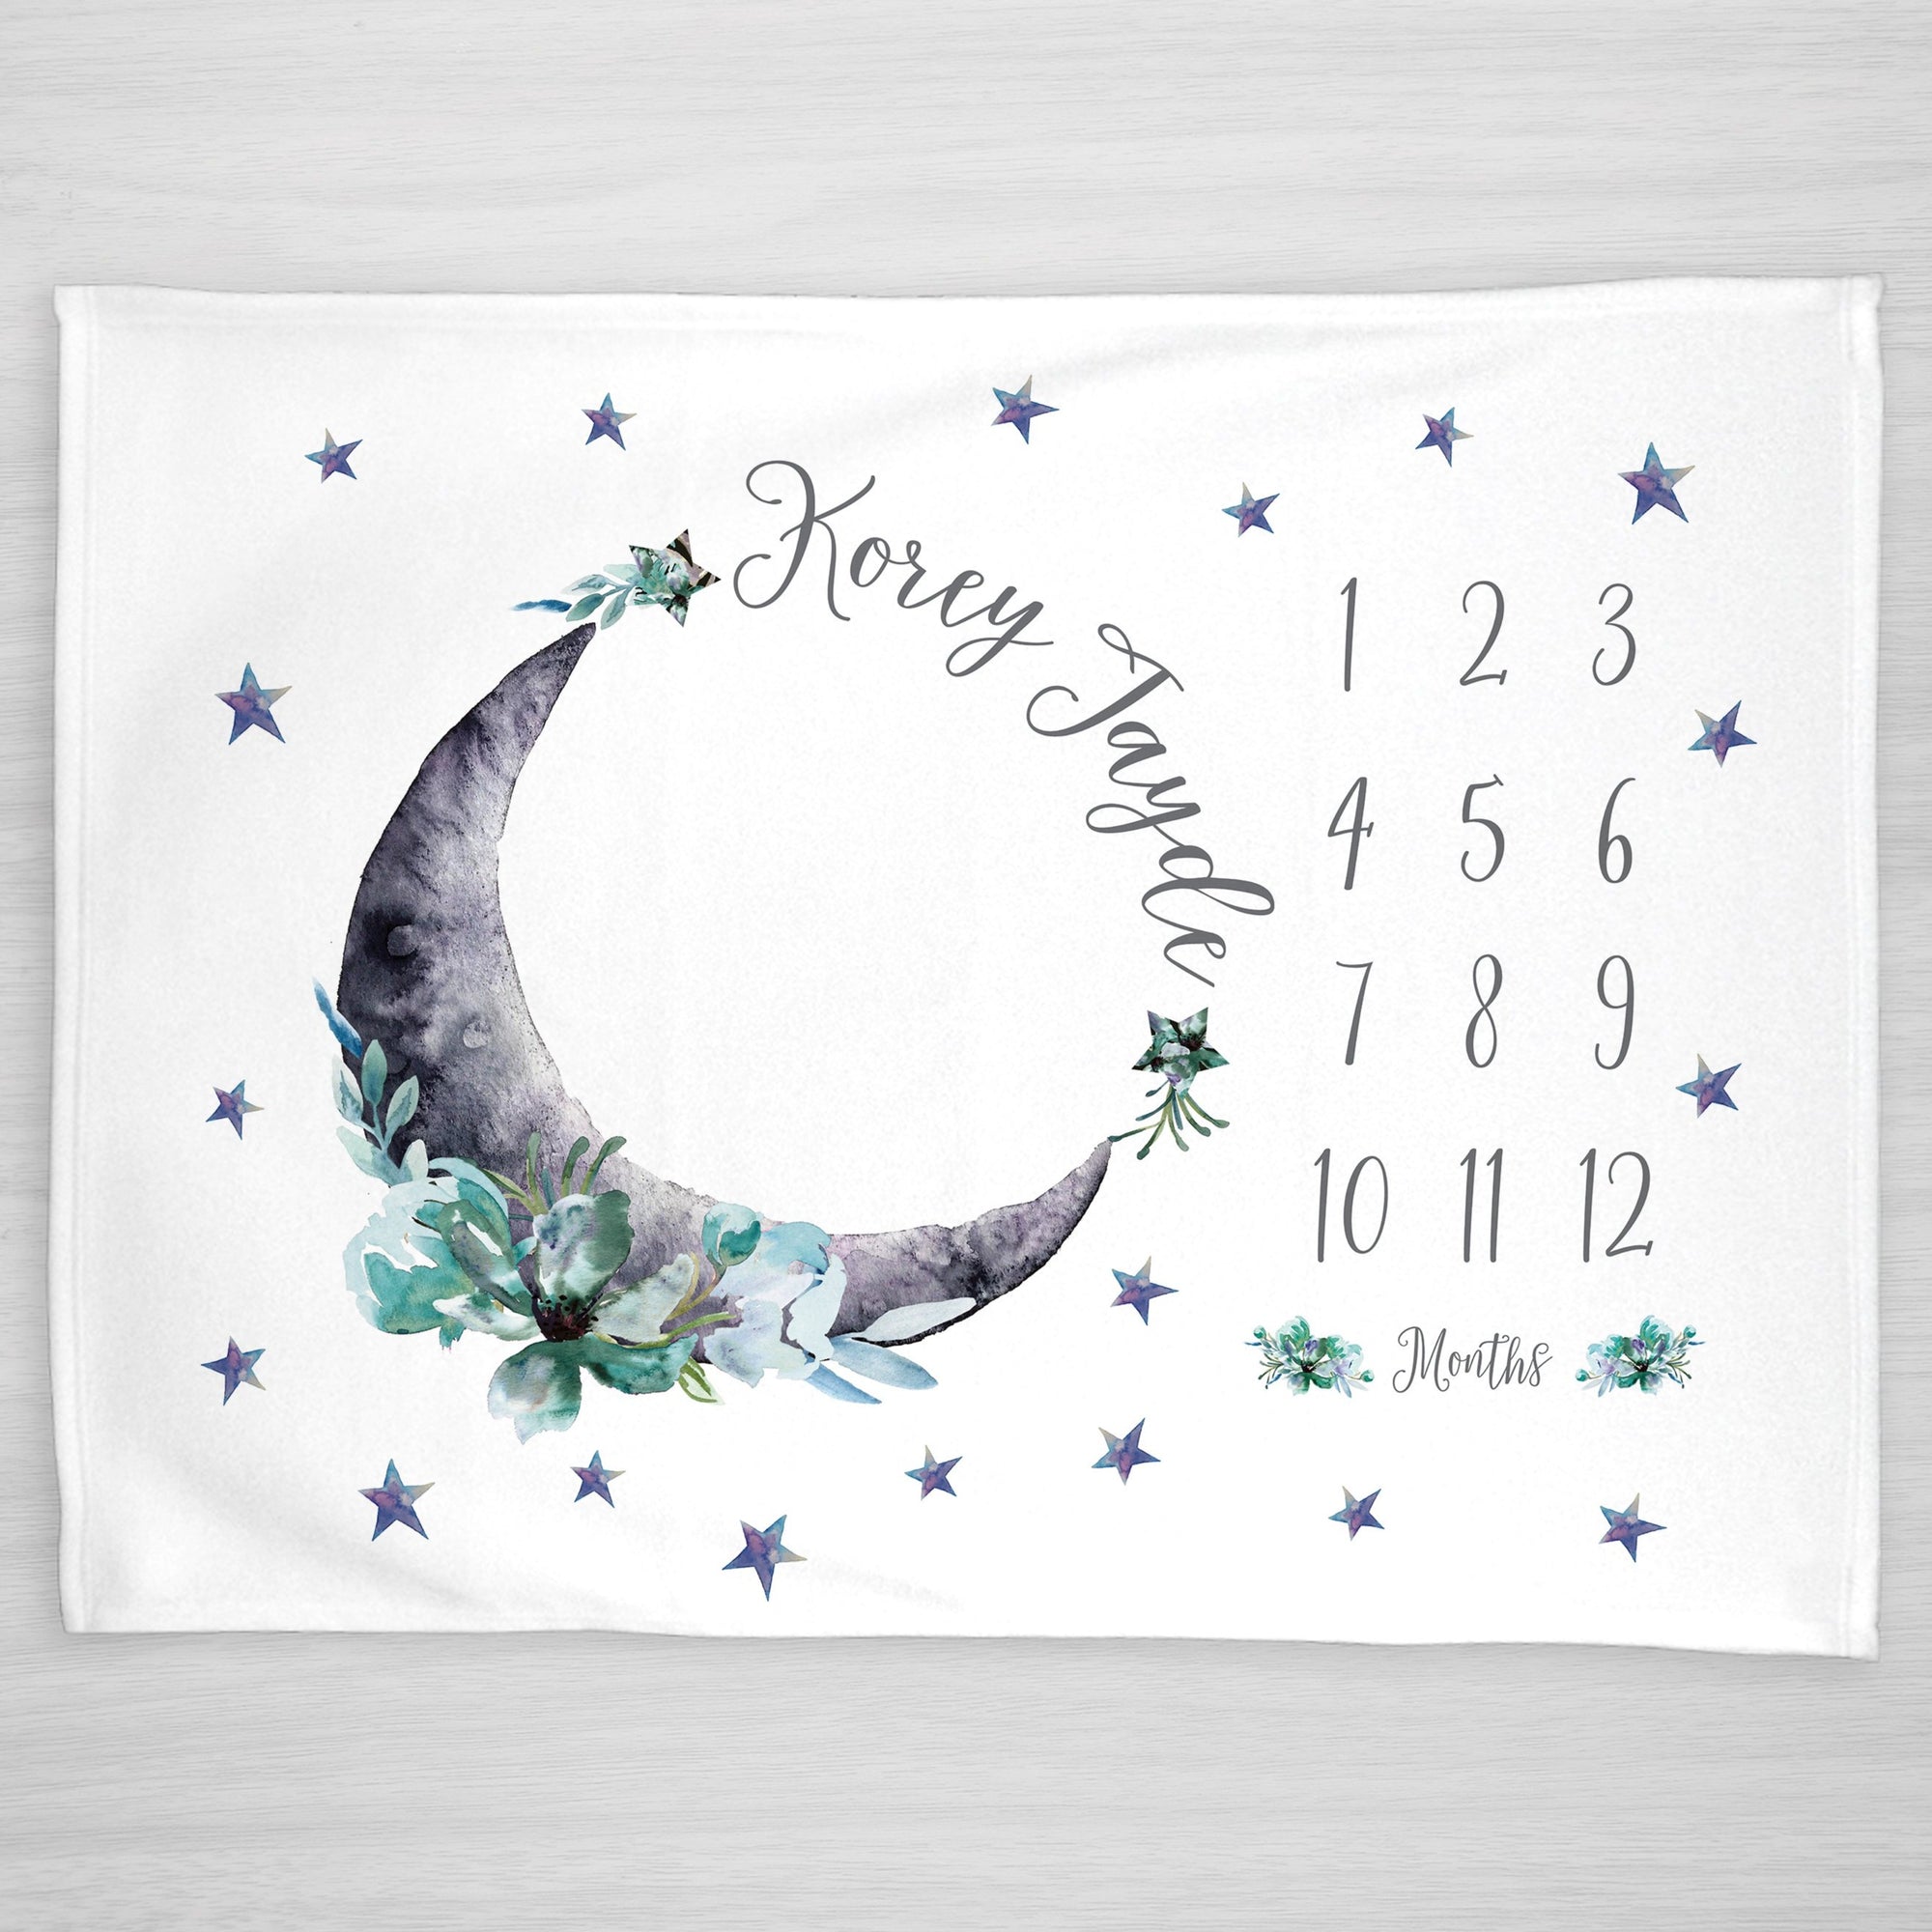 Moon and Stars Milestone blanket in aqua and gray, Personalized with baby's name